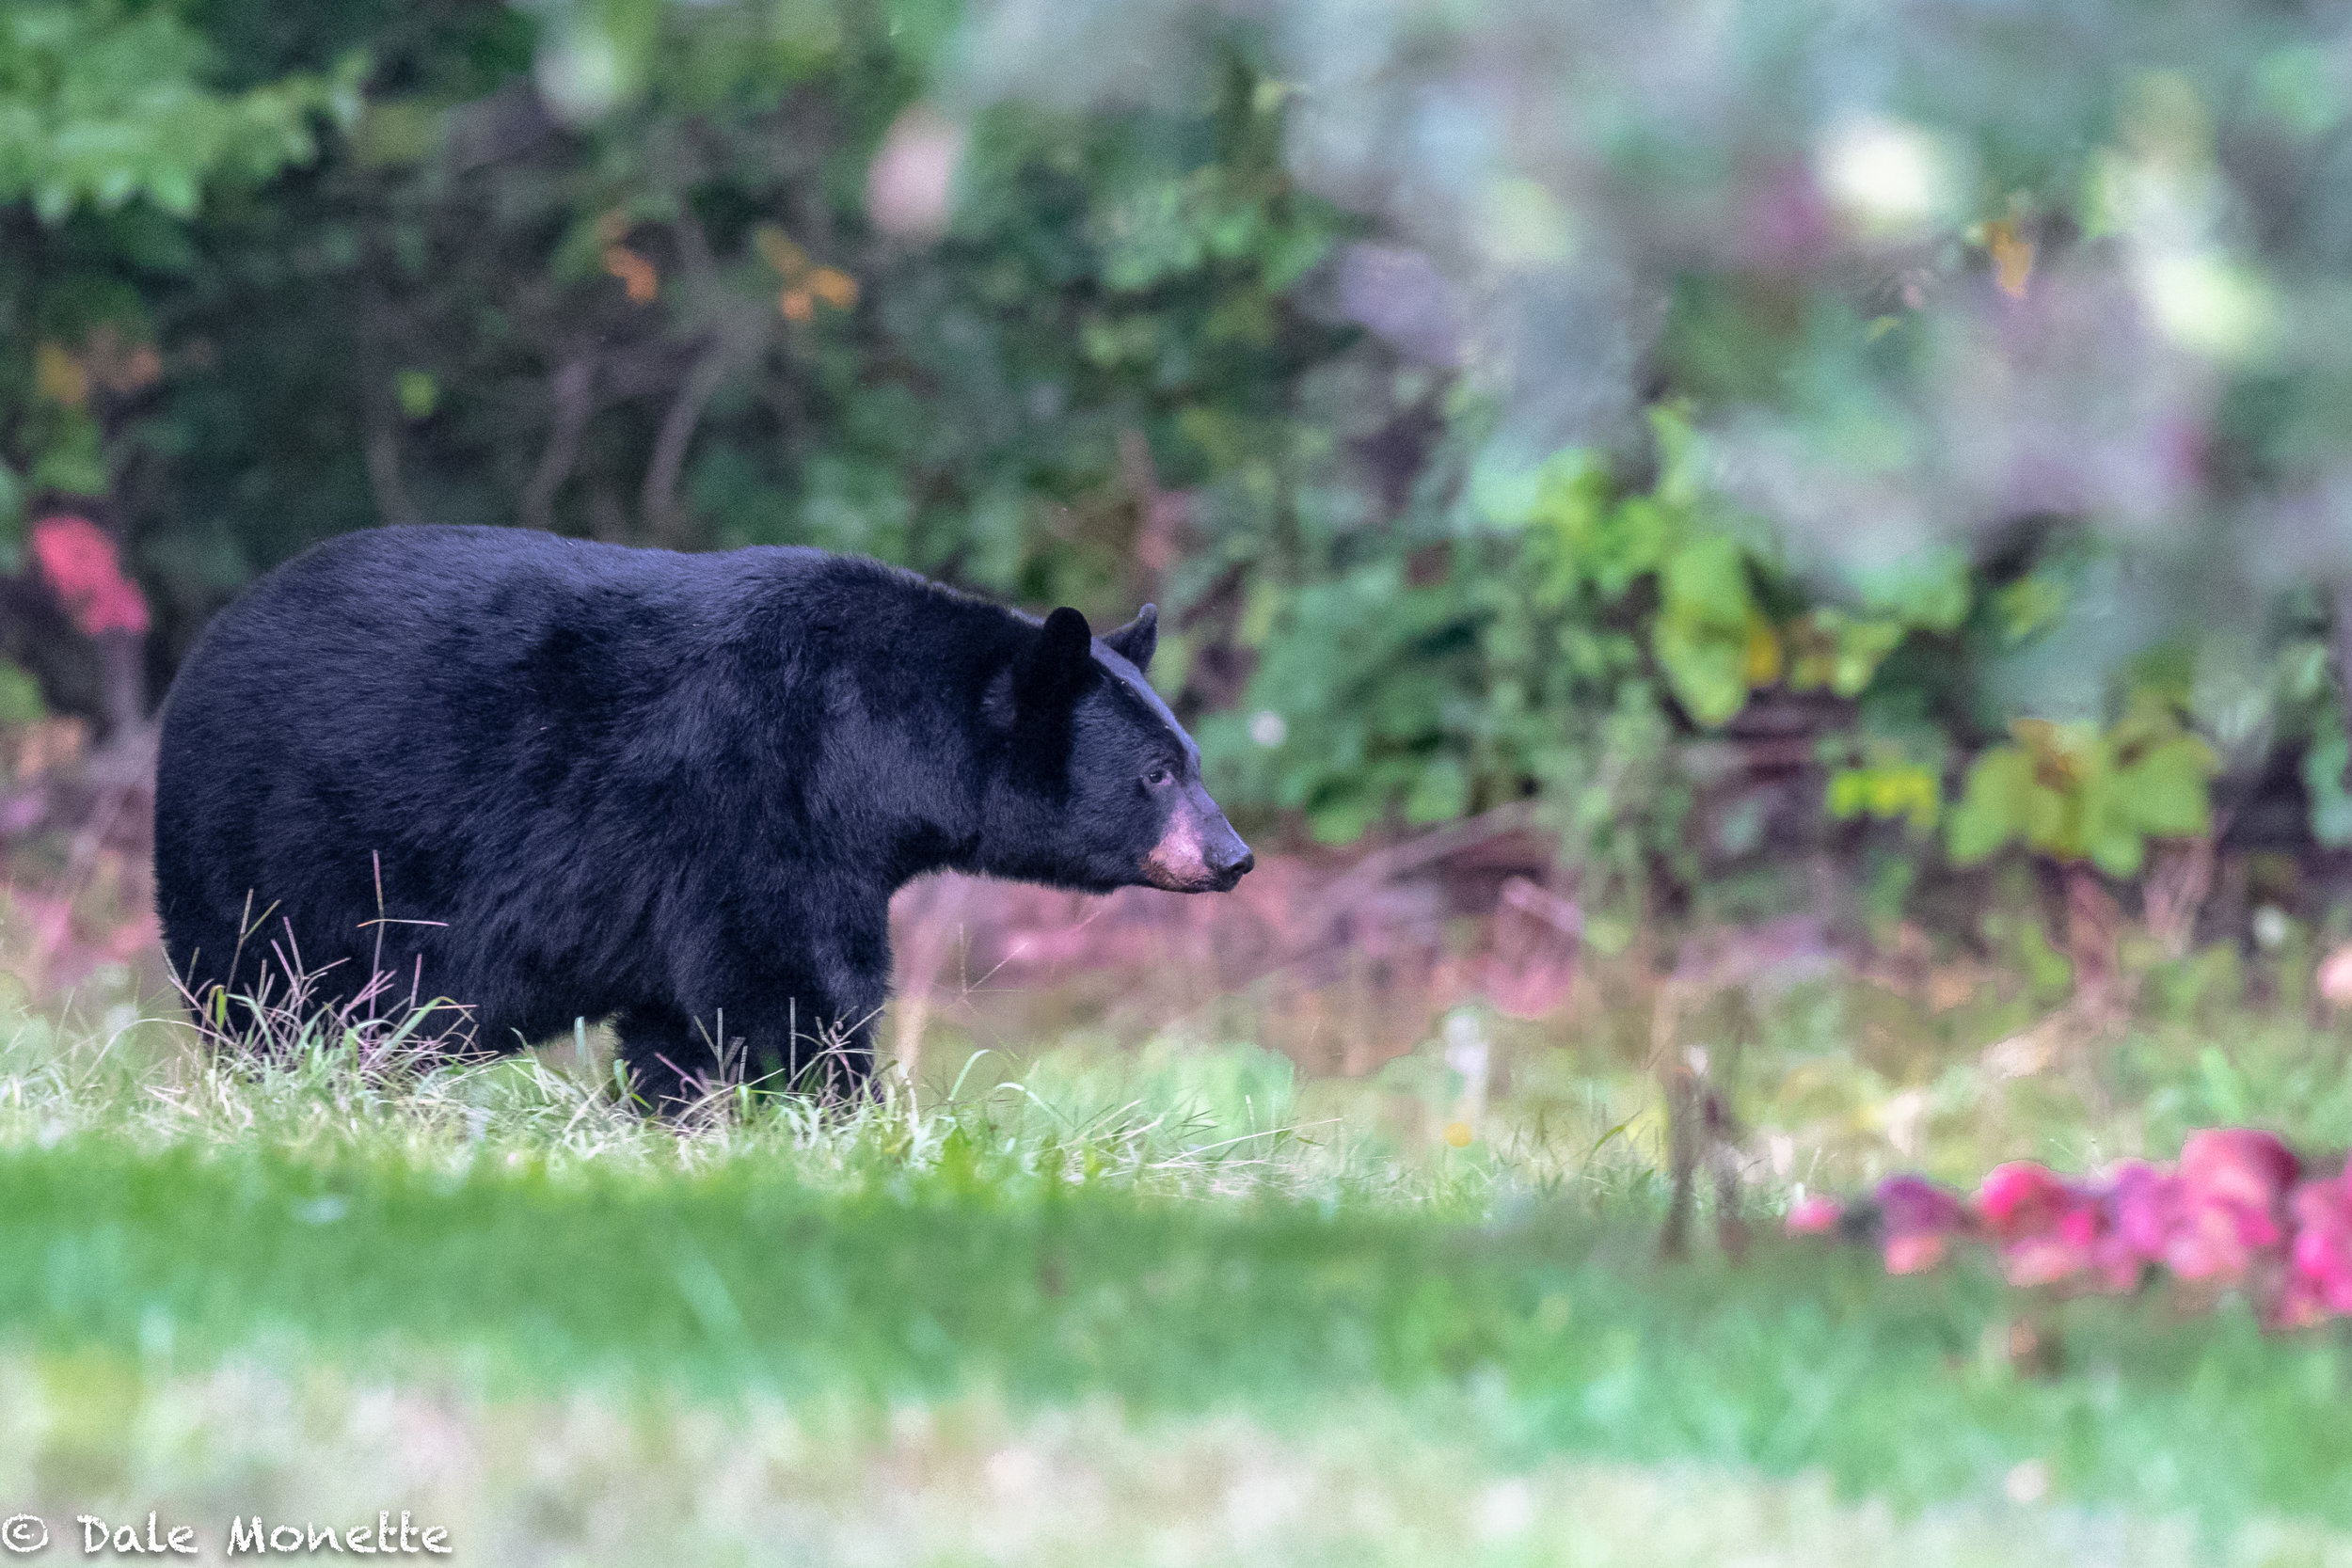   This large bear is zeroing in on a pile of apples that have fallen and thinking what a find !  